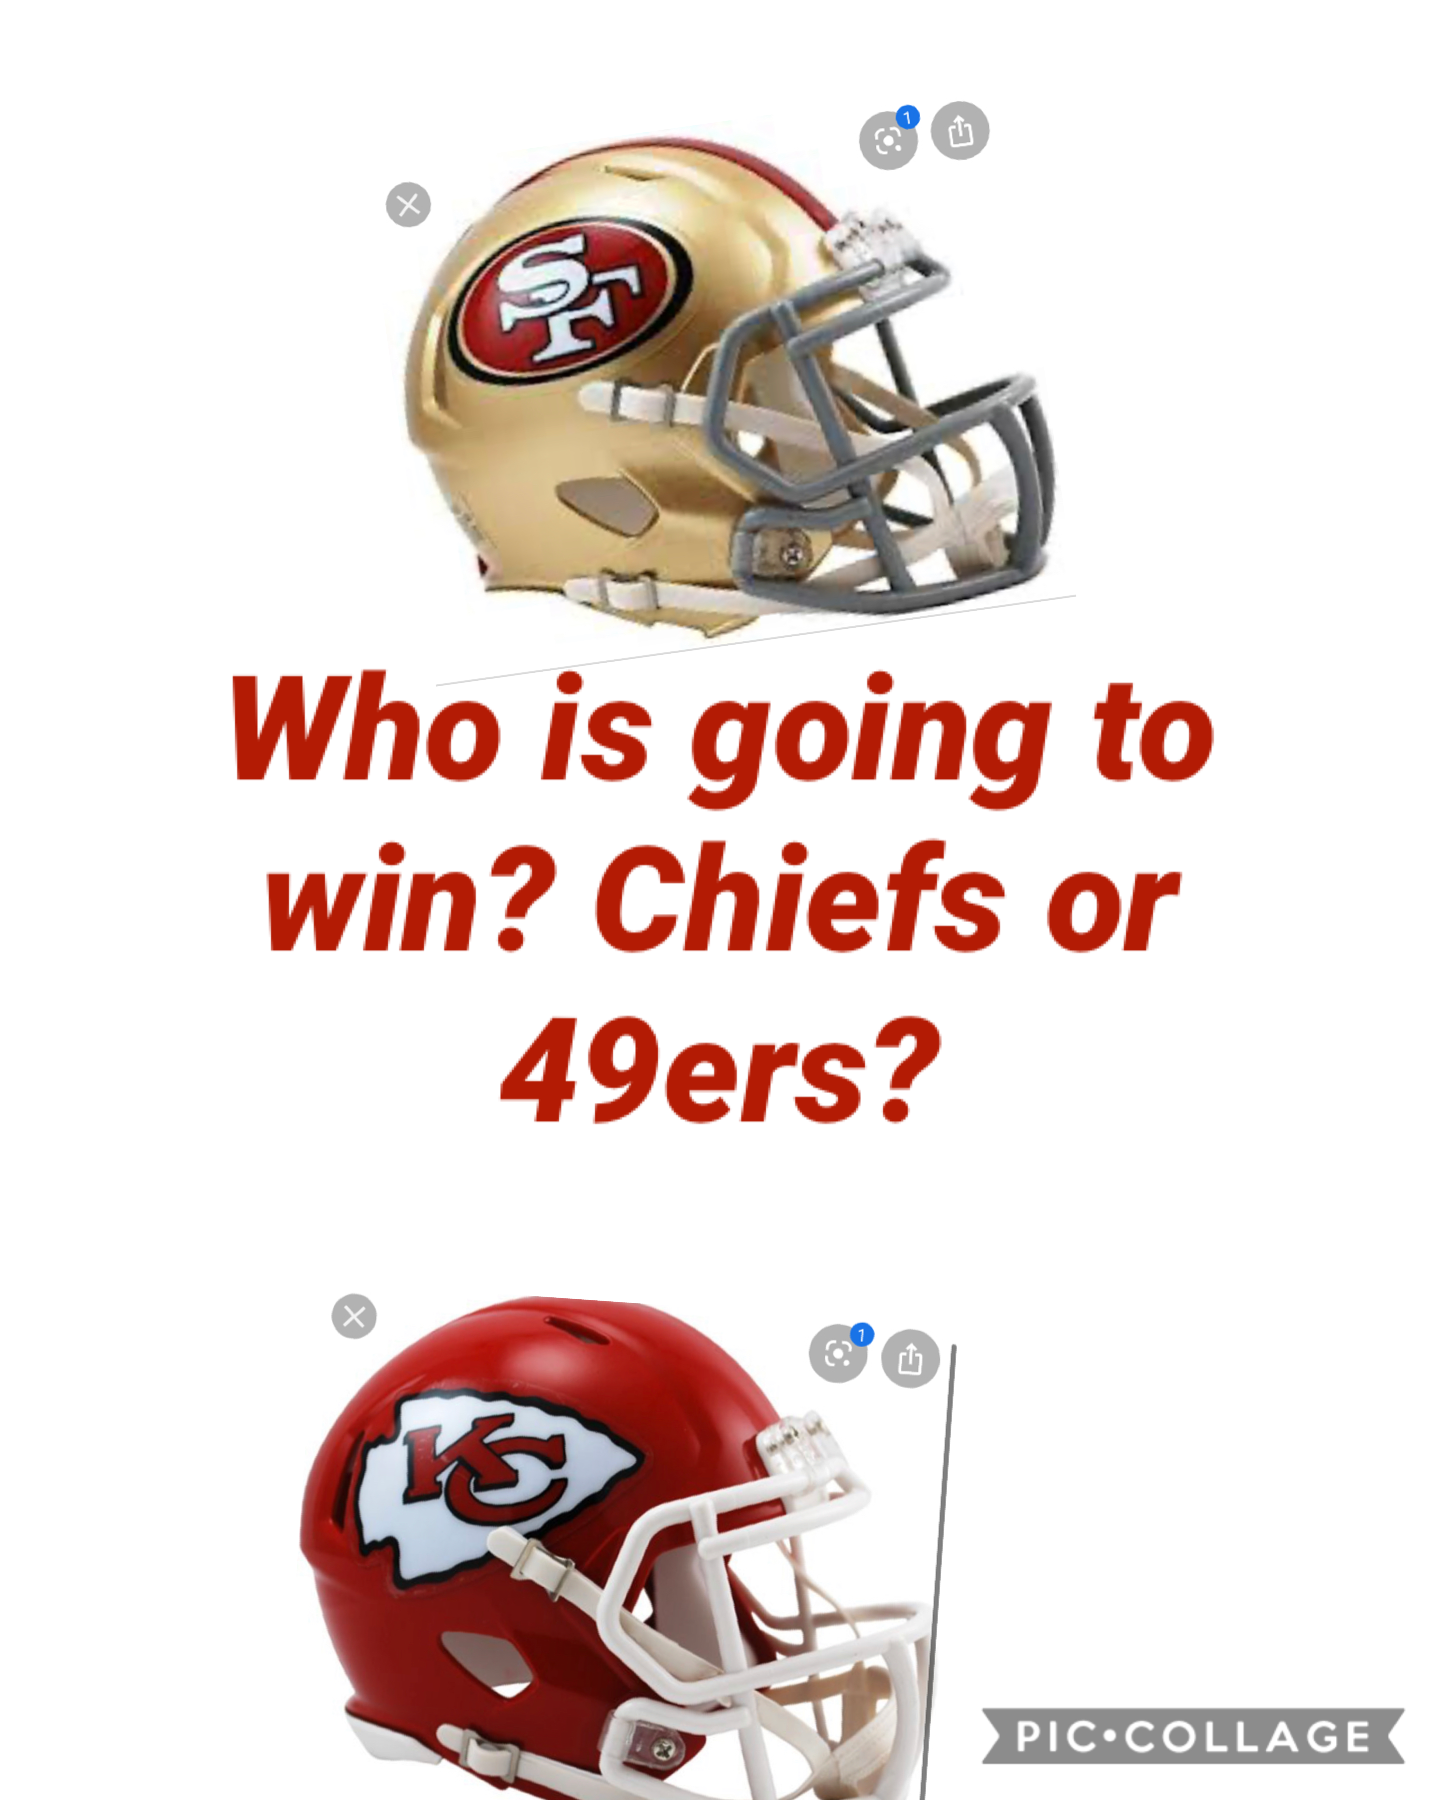 Chiefs or 49ers?